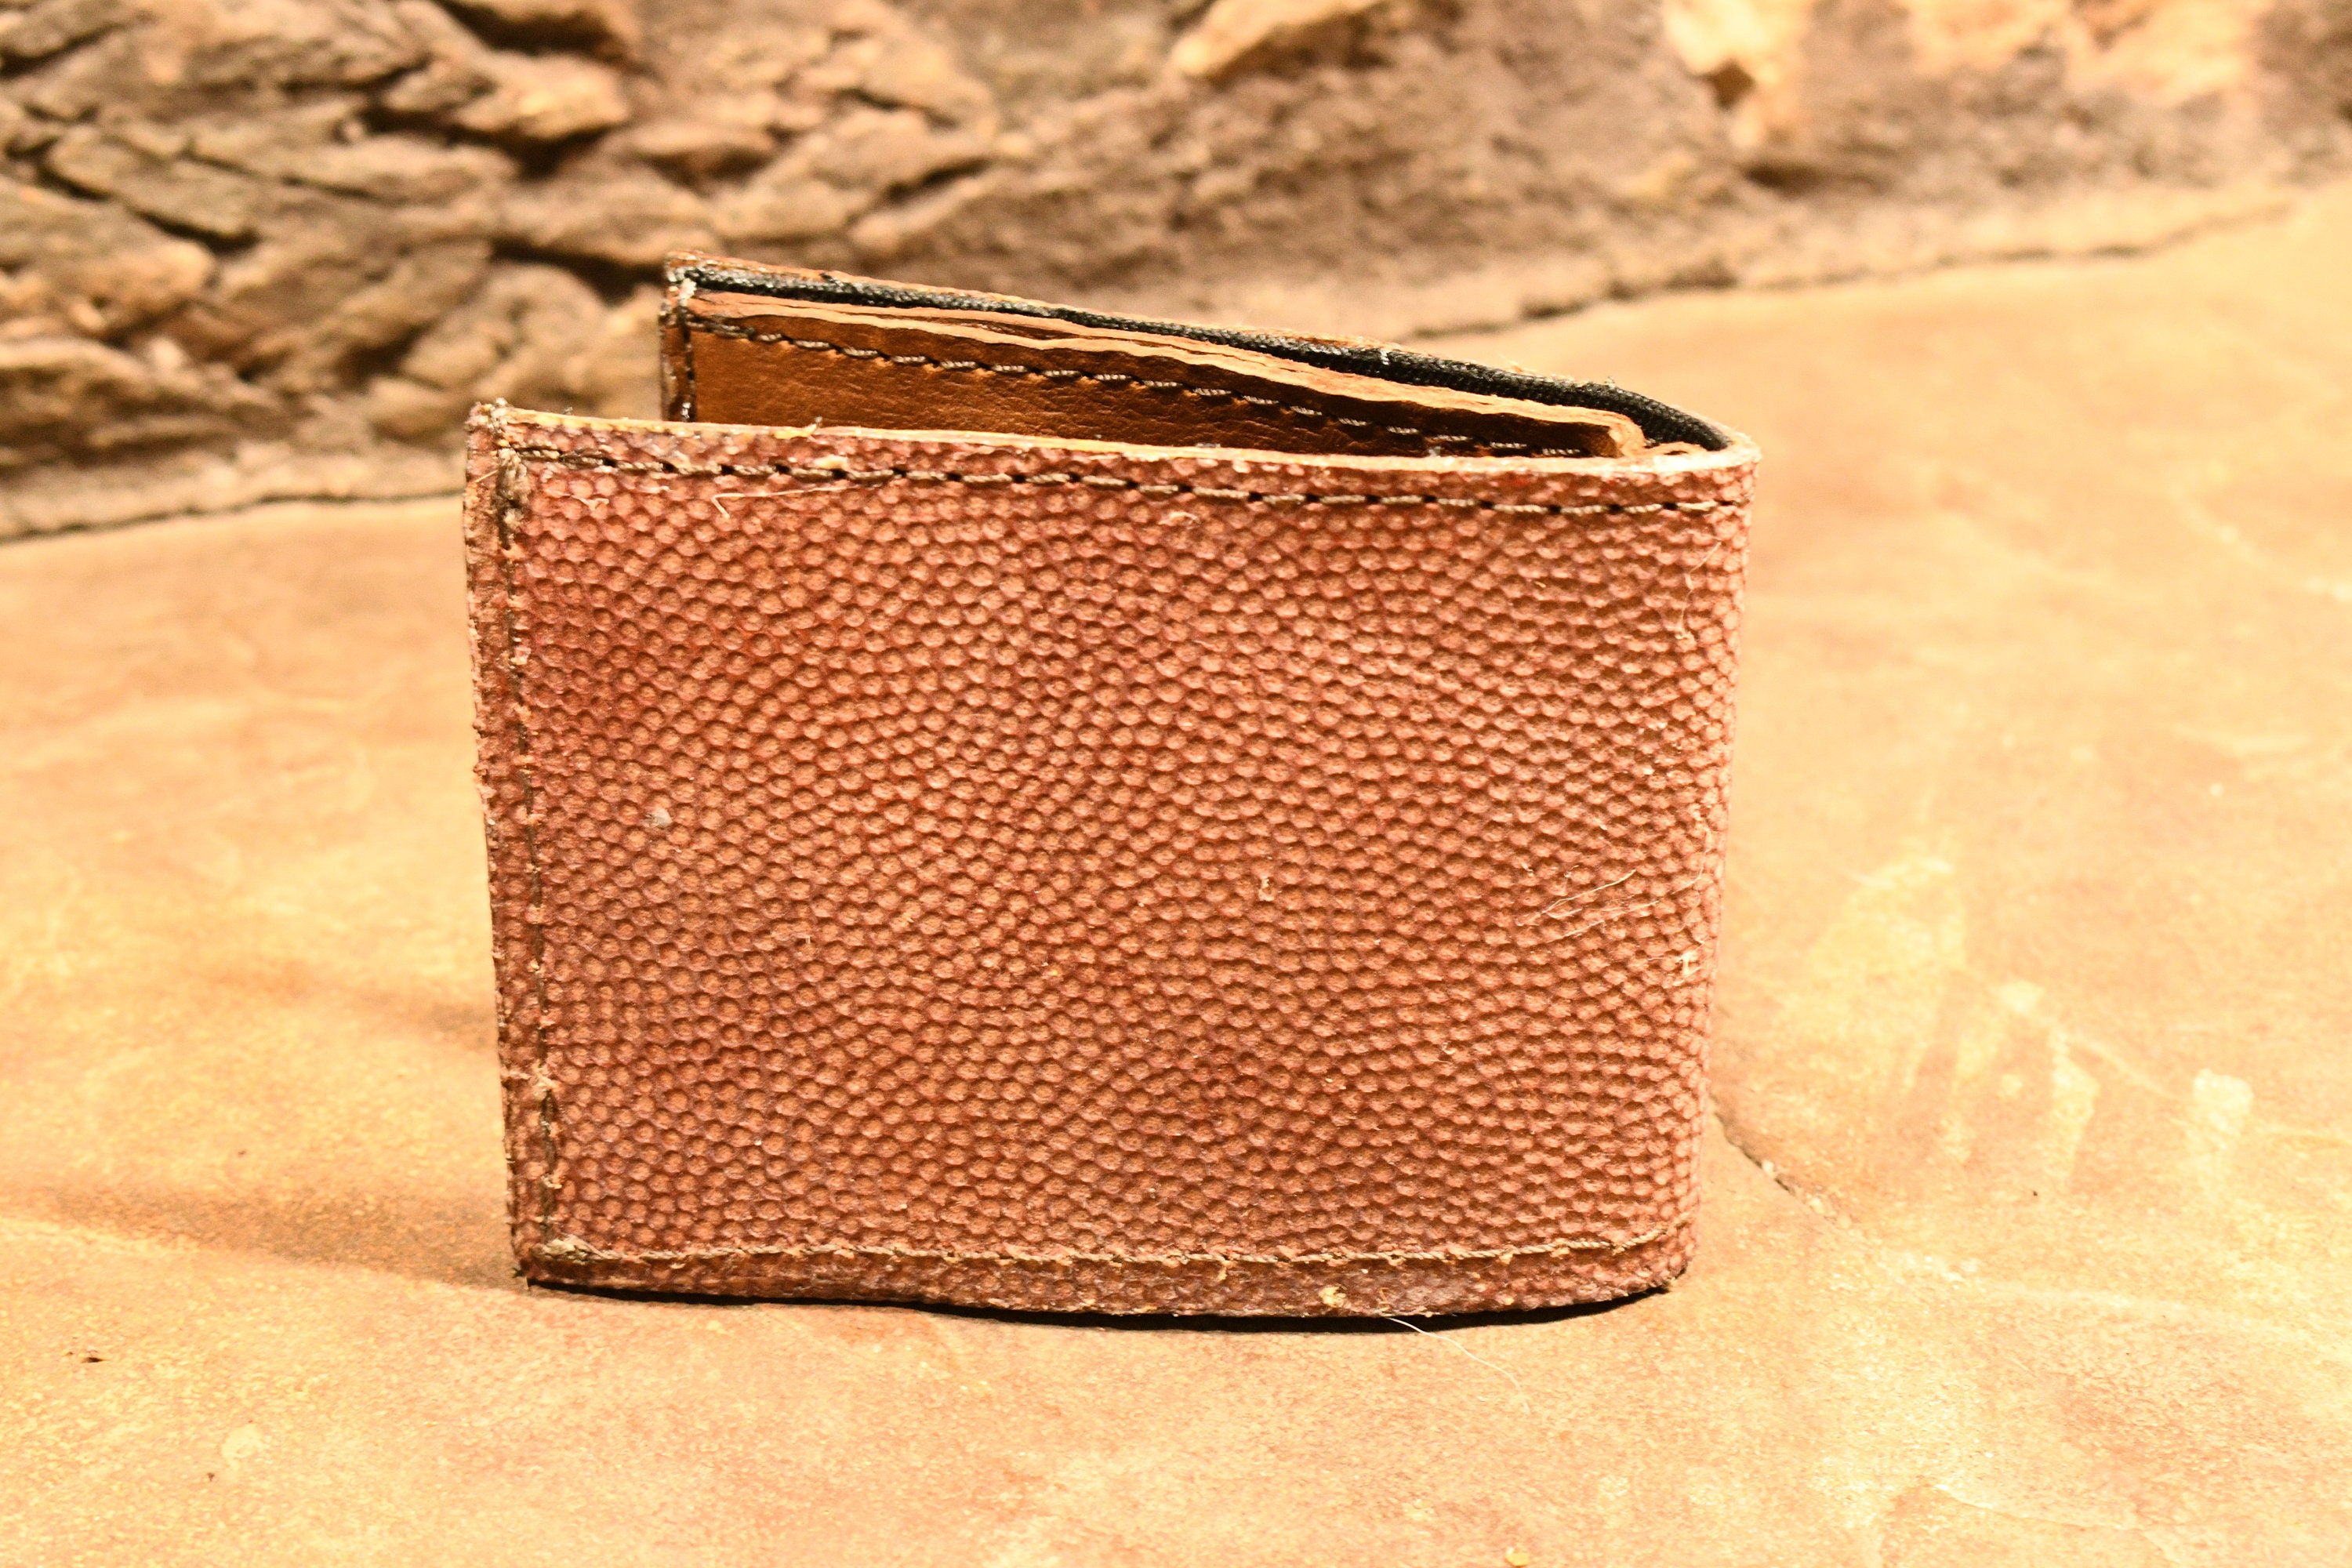 Repurposed Football Bifold Wallet With Dalls Cowboys Patch 